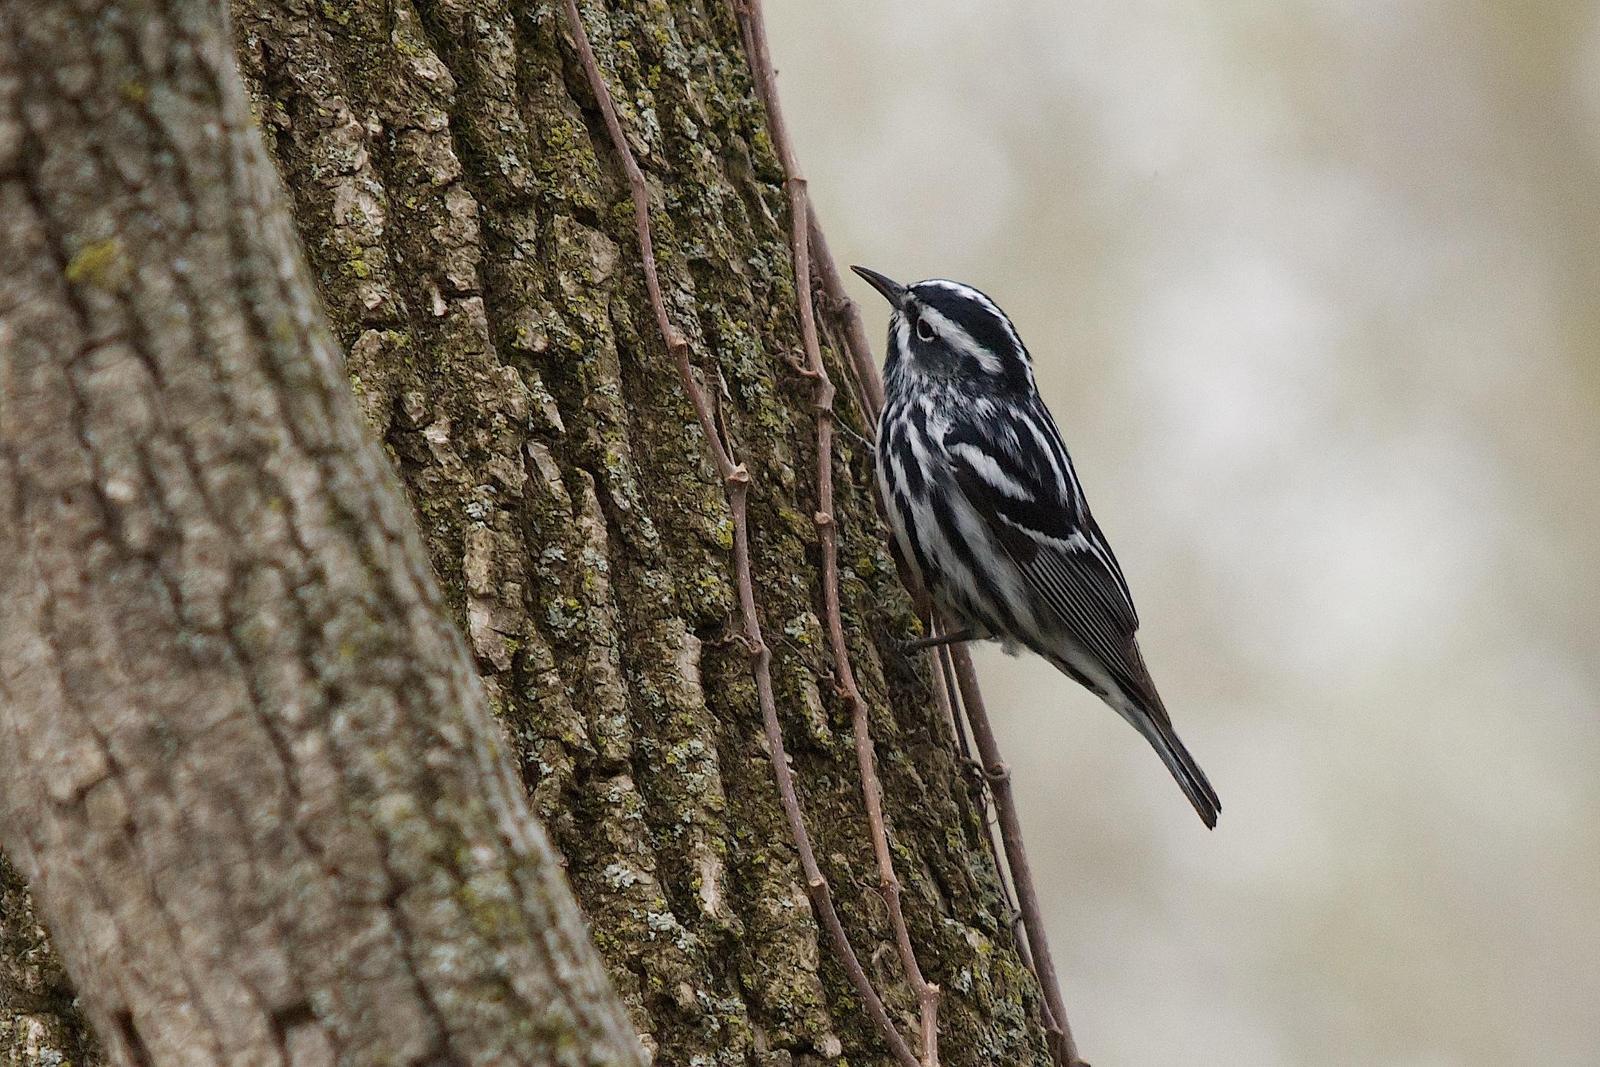 Black-and-white Warbler Photo by Gerald Hoekstra